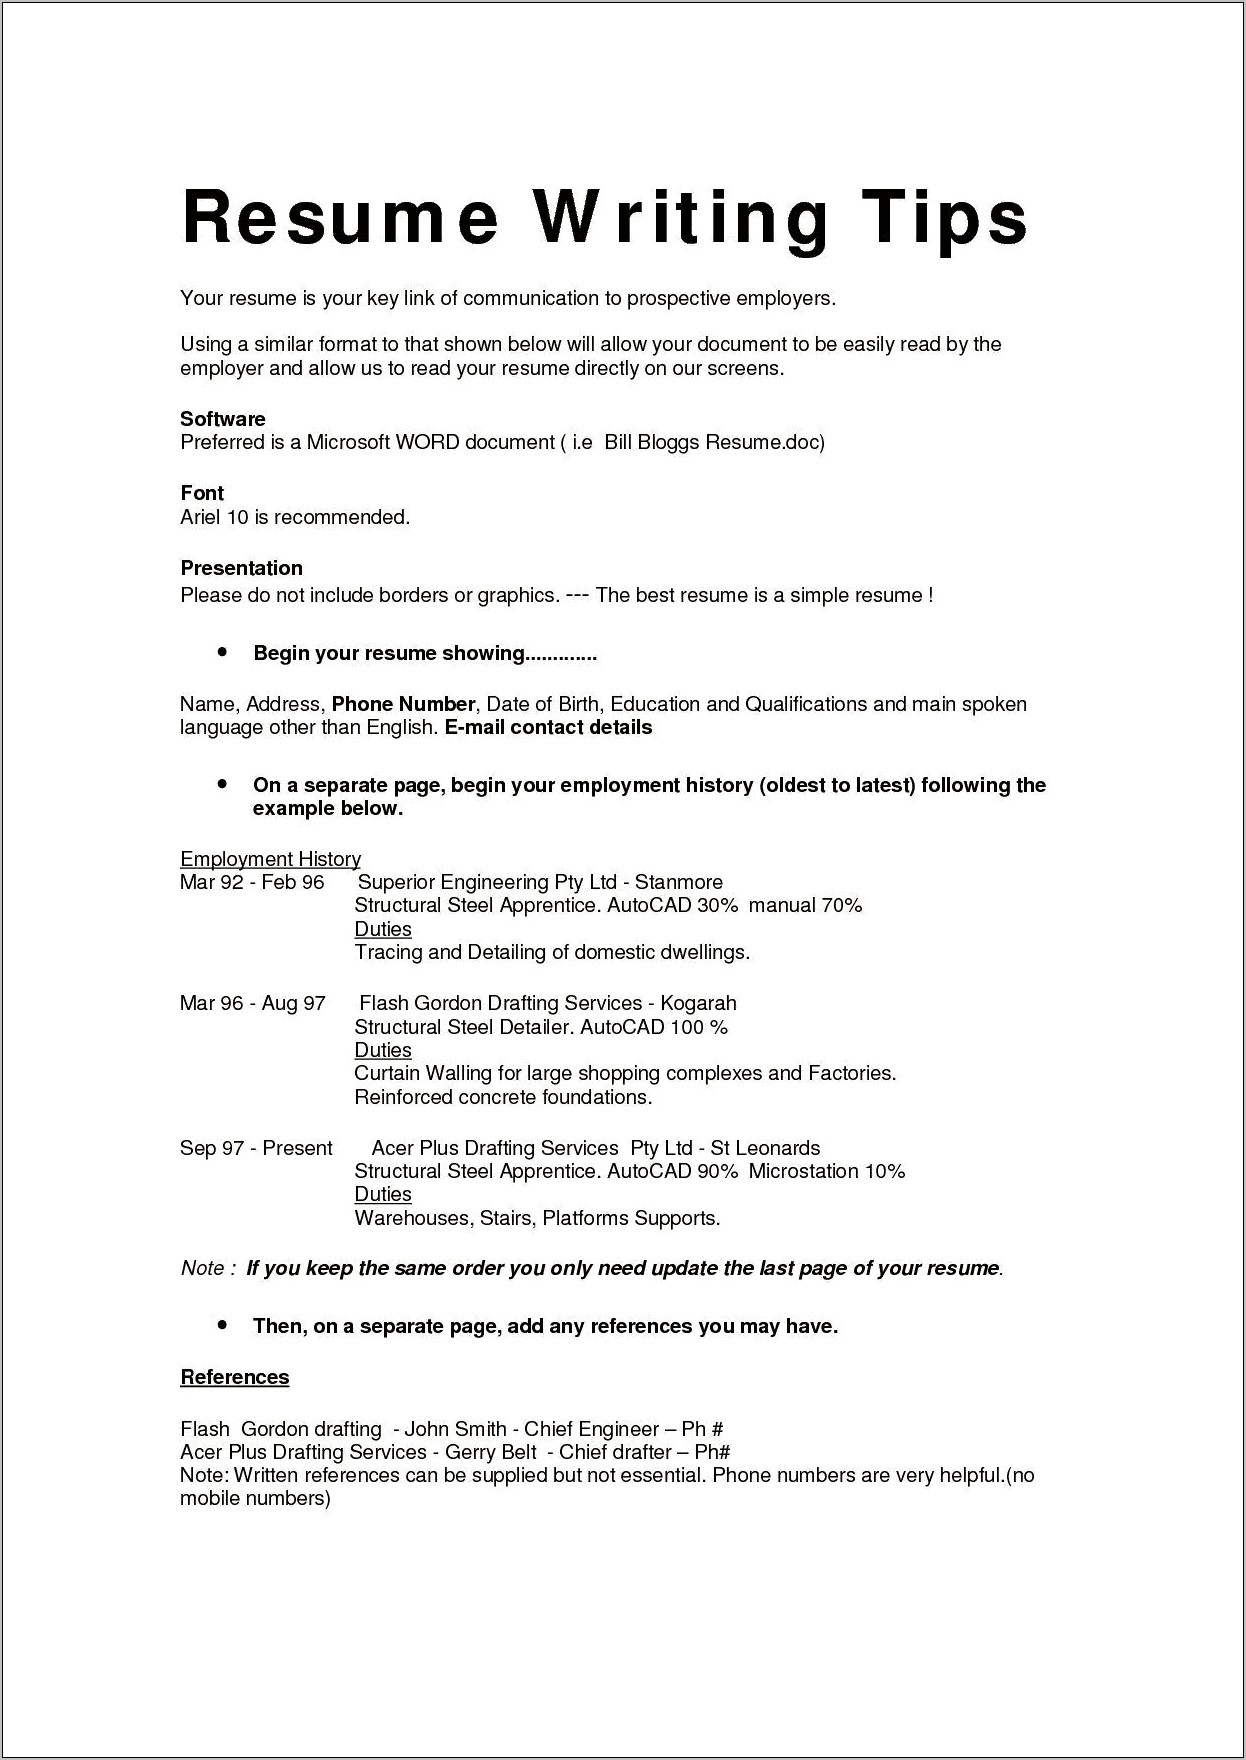 Sample Resume With No Employment Dates